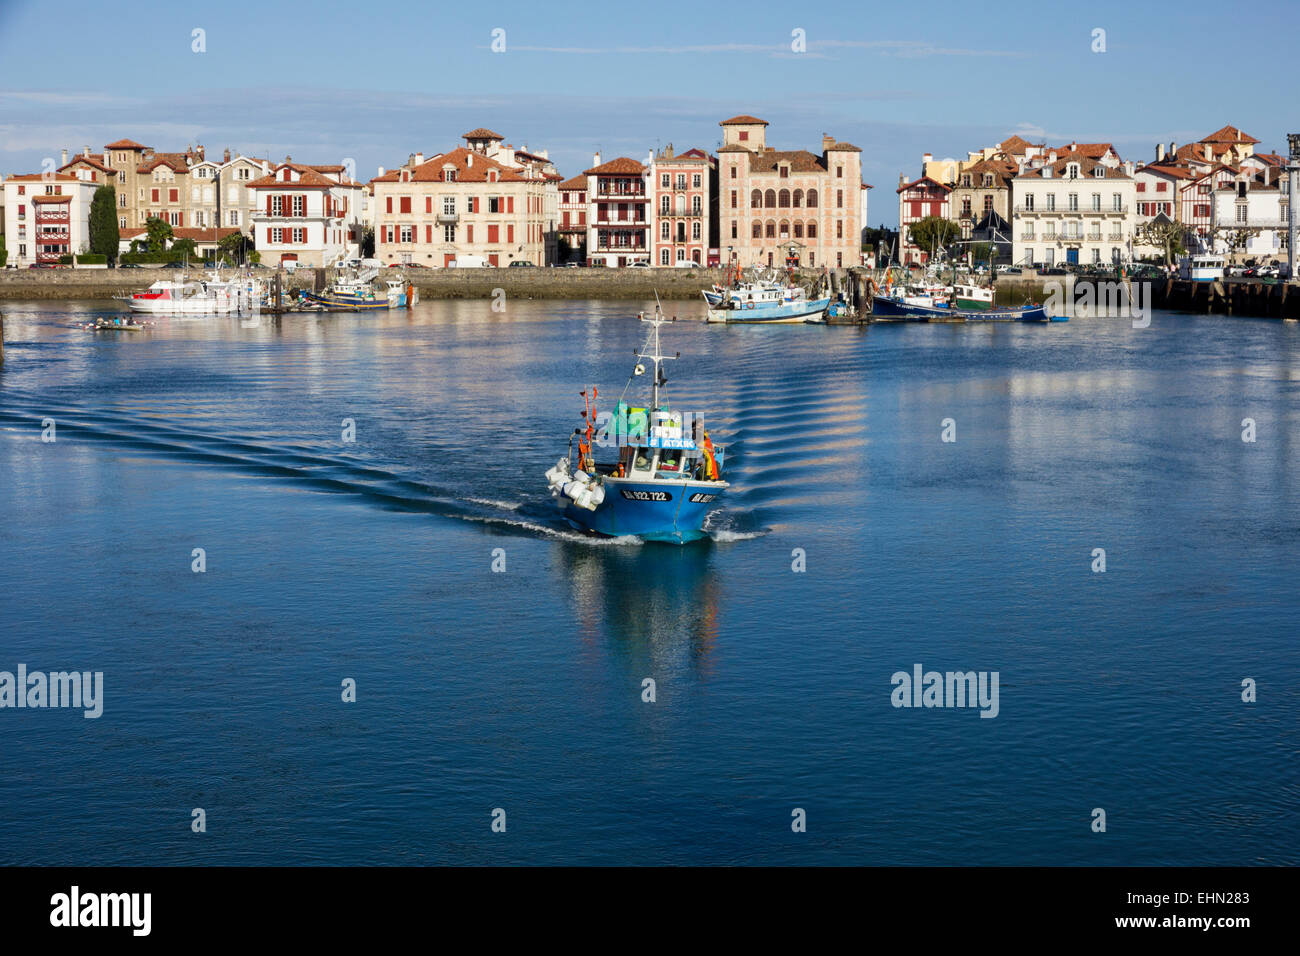 Small fishing boat returning to harbour, St Jean de Luz, Southern France Stock Photo